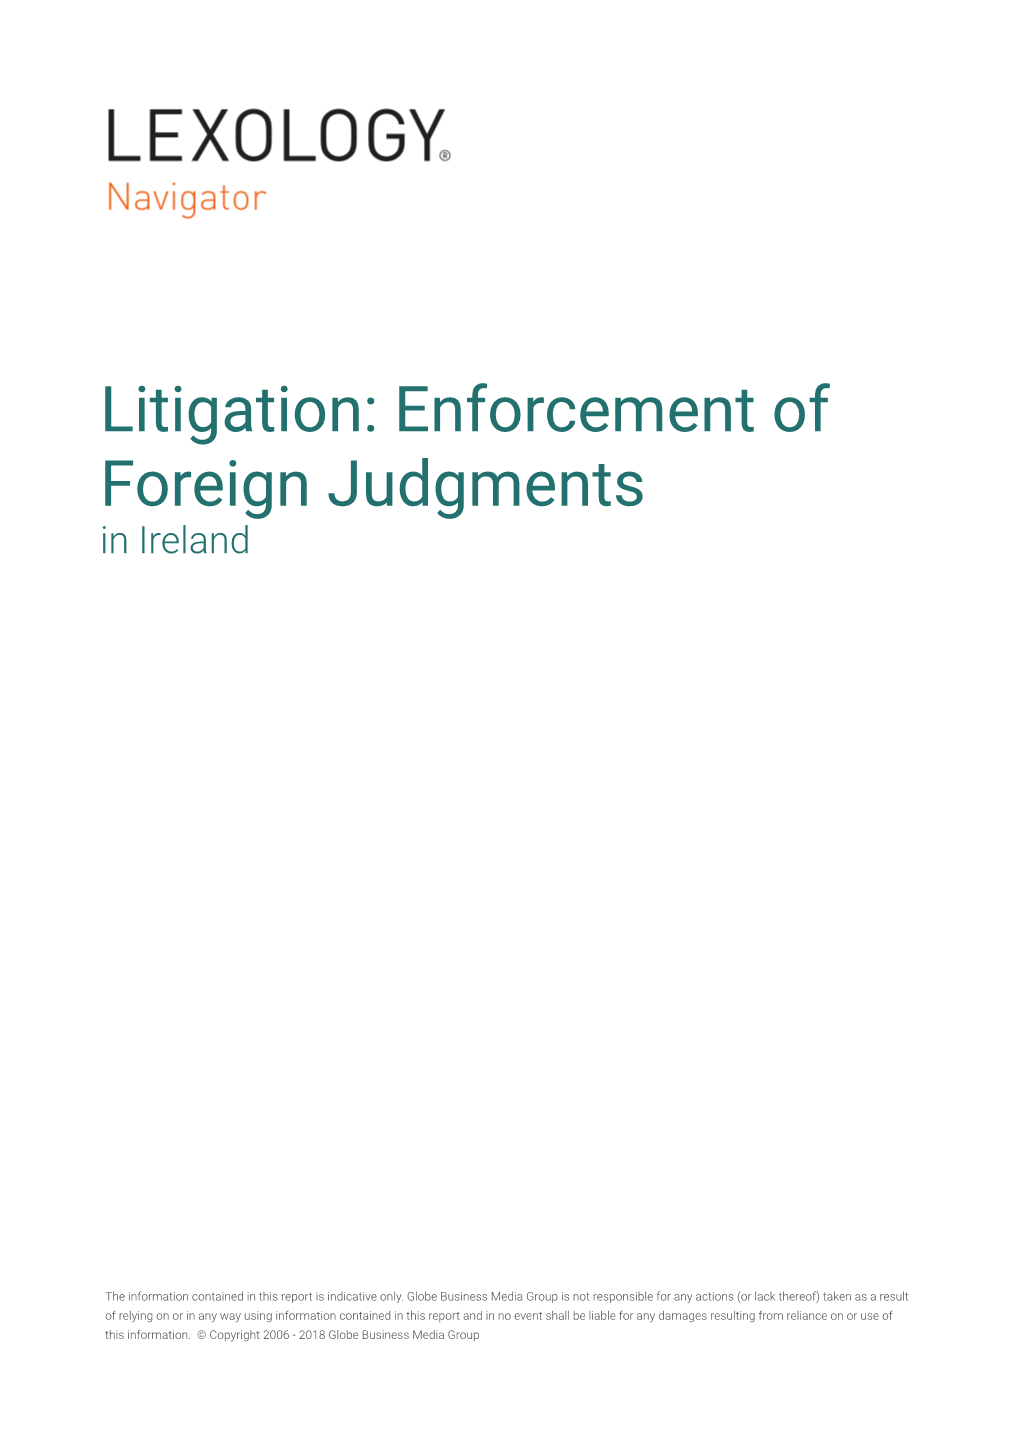 Litigation: Enforcement of Foreign Judgments in Ireland